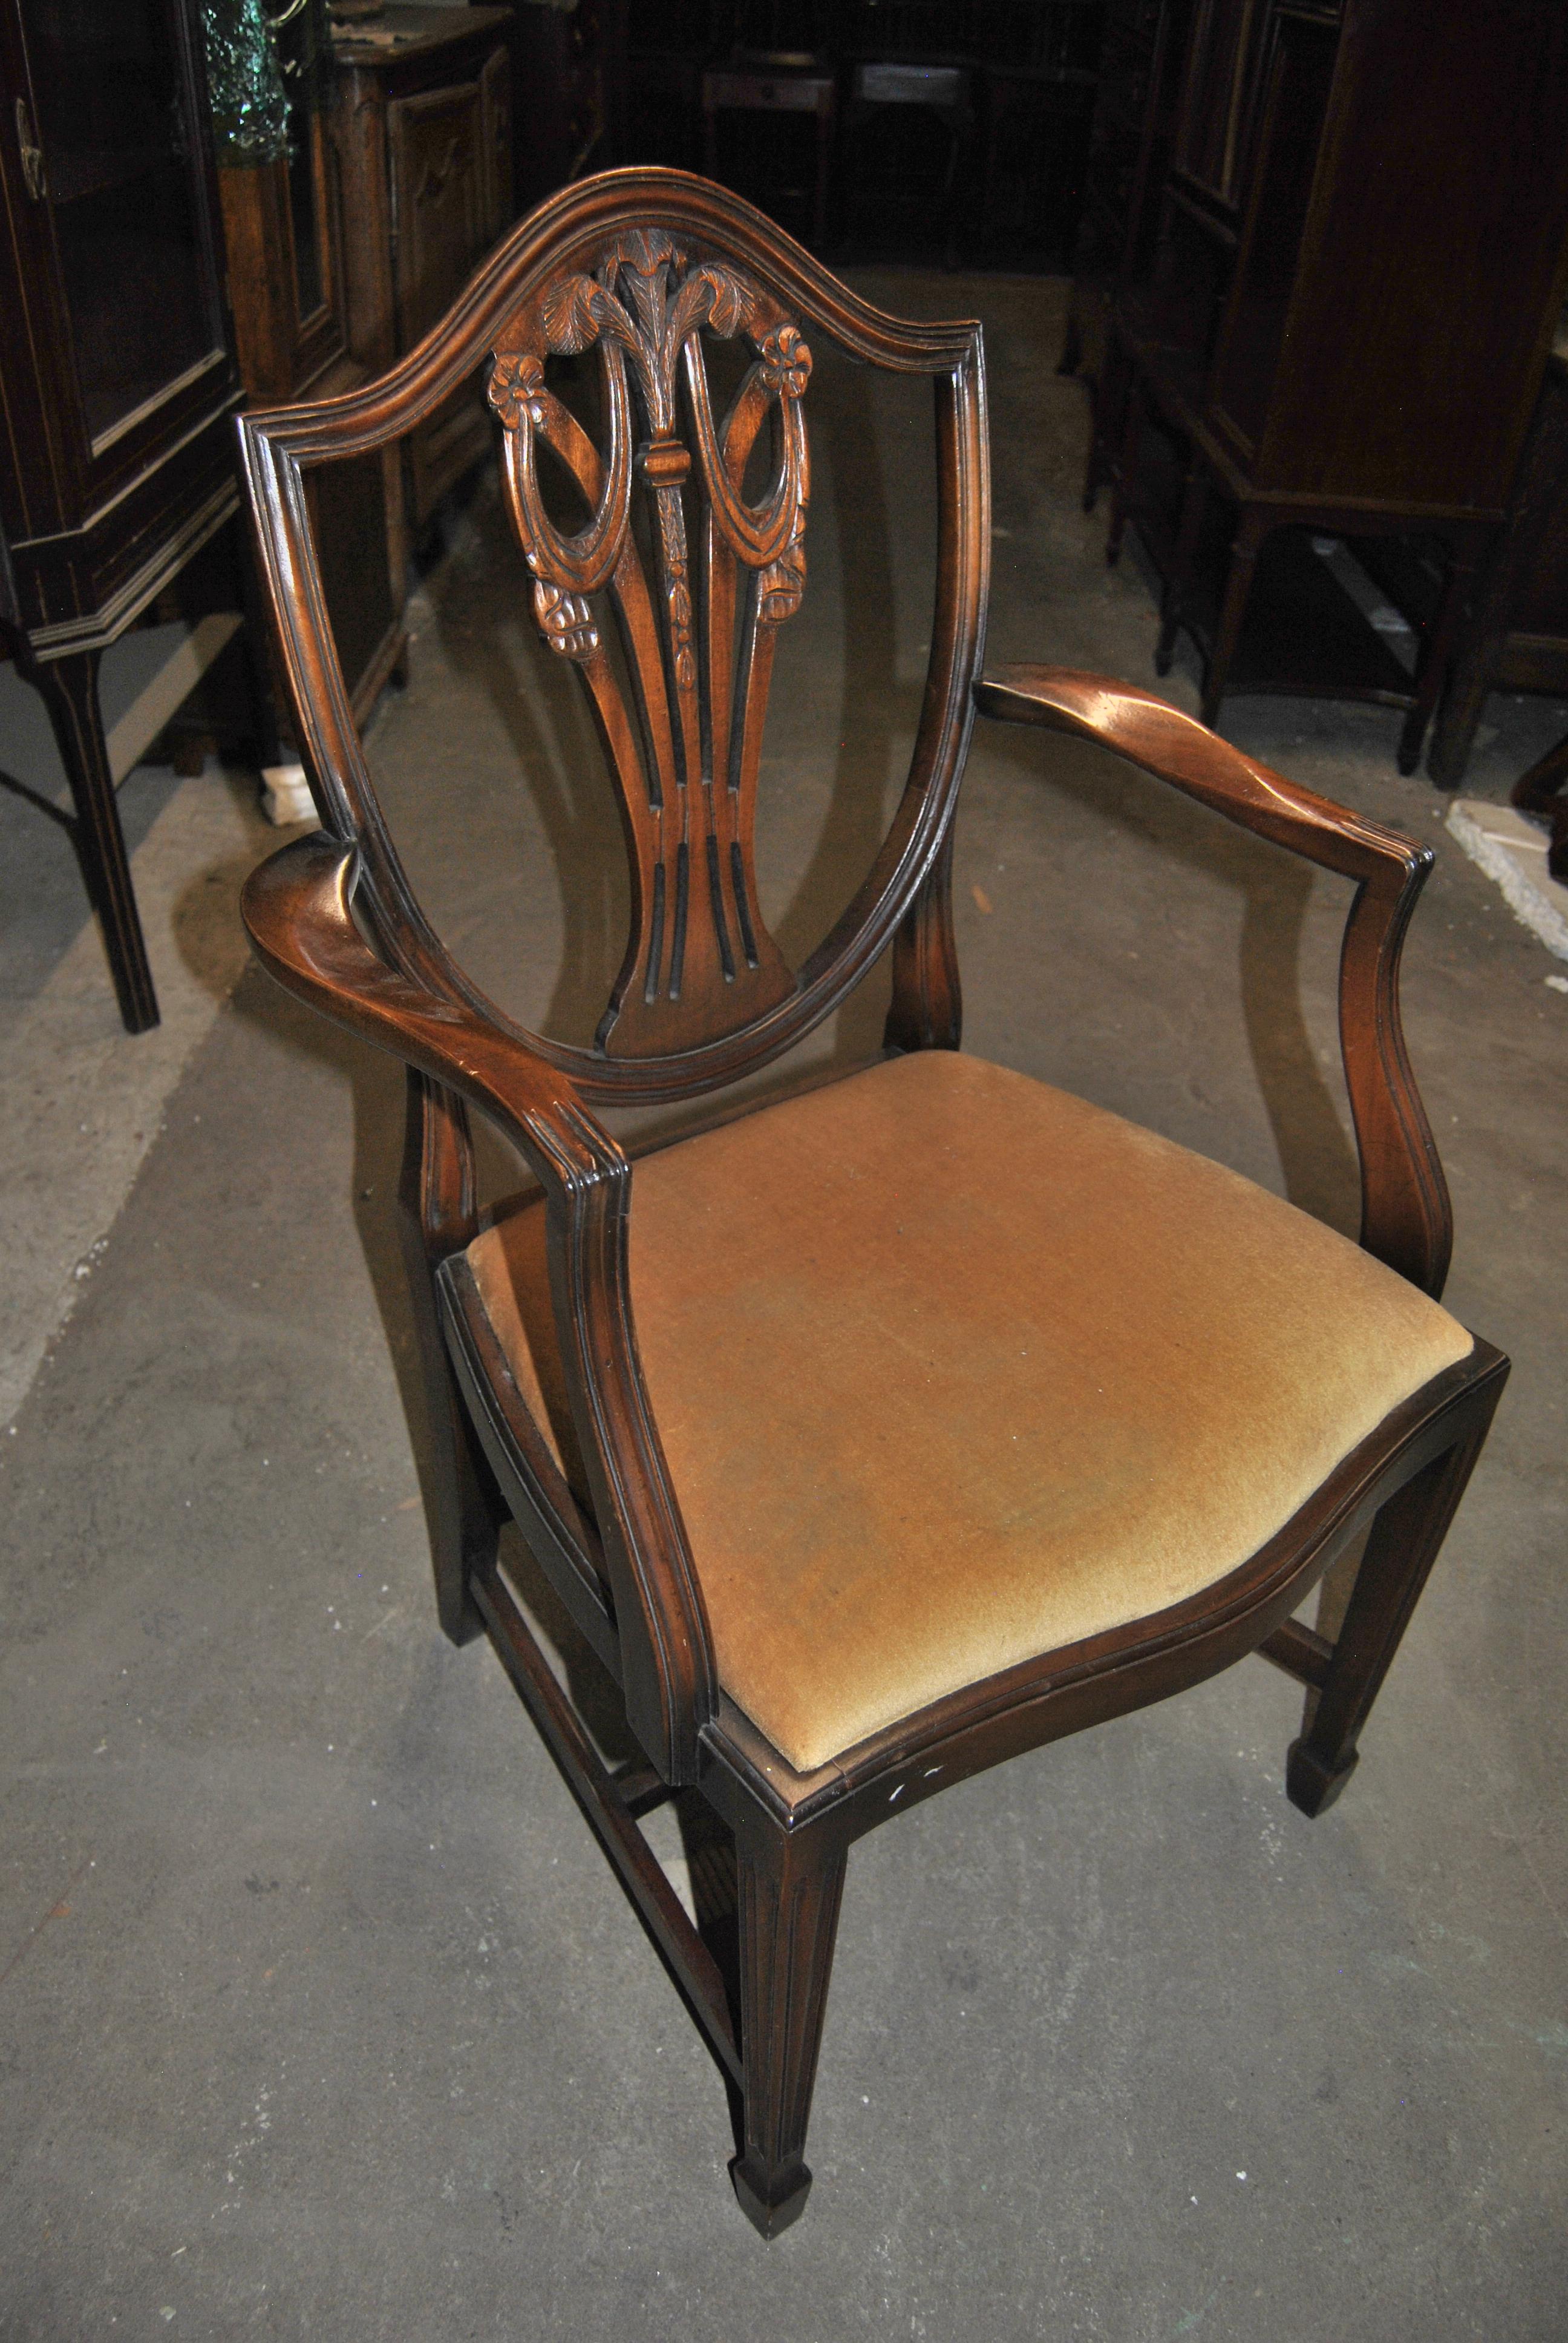 This is a matched set of 12 solid mahogany Hepplewhite style shield back chairs made in England, circa 1950. The set consists of 2 arm chairs and 10 side chairs. They have a beautifully shaped Shield Back with reeded molding. Each is all hand carved